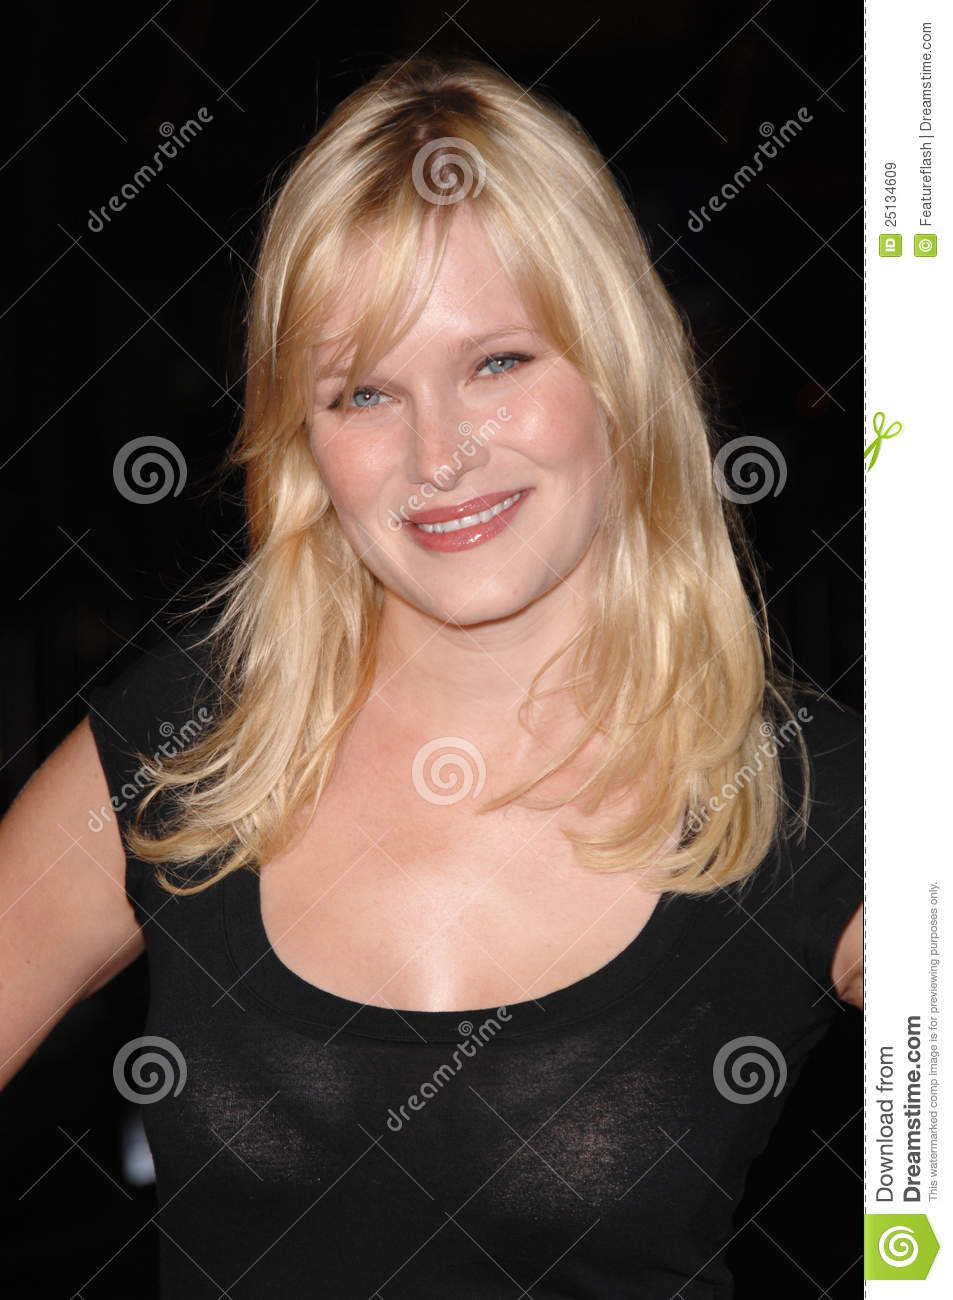 nicholle-tom-pictures